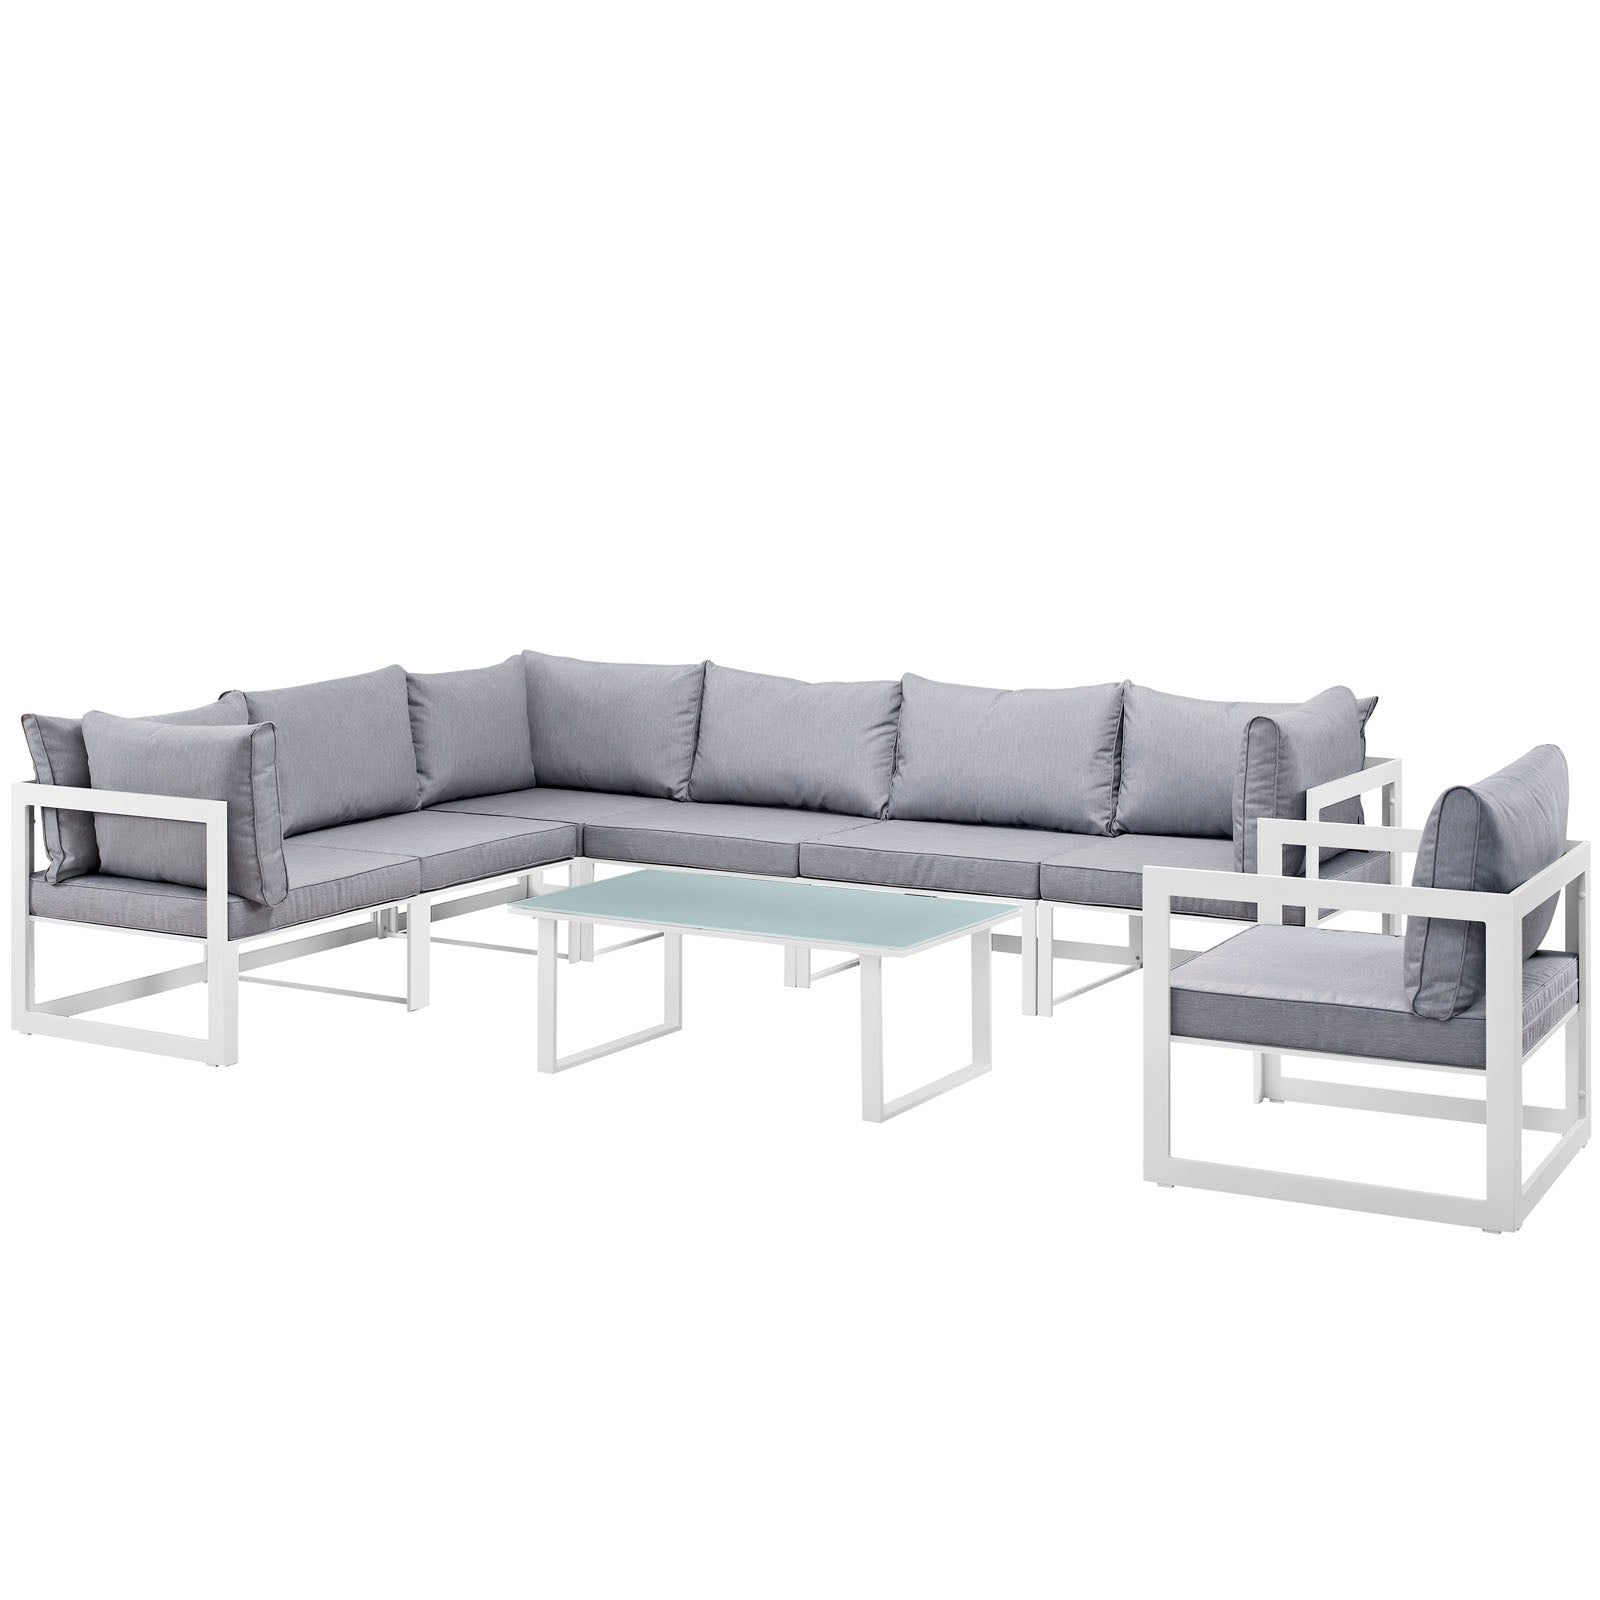 Modway Outdoor Conversation Sets - Fortuna 8 Piece Outdoor 150"W Patio Sectional Sofa Set White Gray